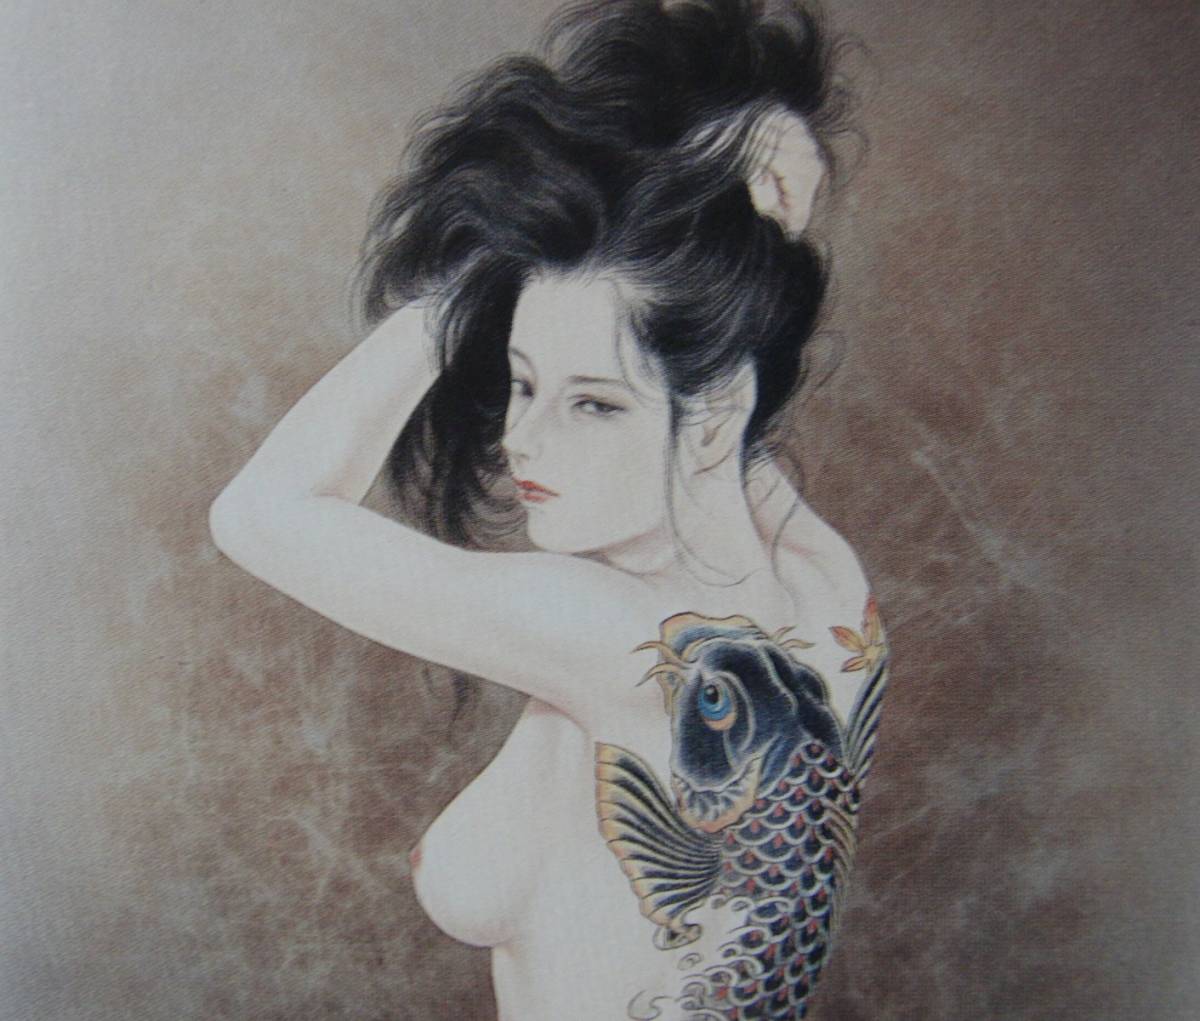  small . necessary,[ one pcs common carp ], carefuly selected, rare book of paintings in print ., frame attaching, desk size, art, beautiful woman, tattoo, condition excellent, free shipping 